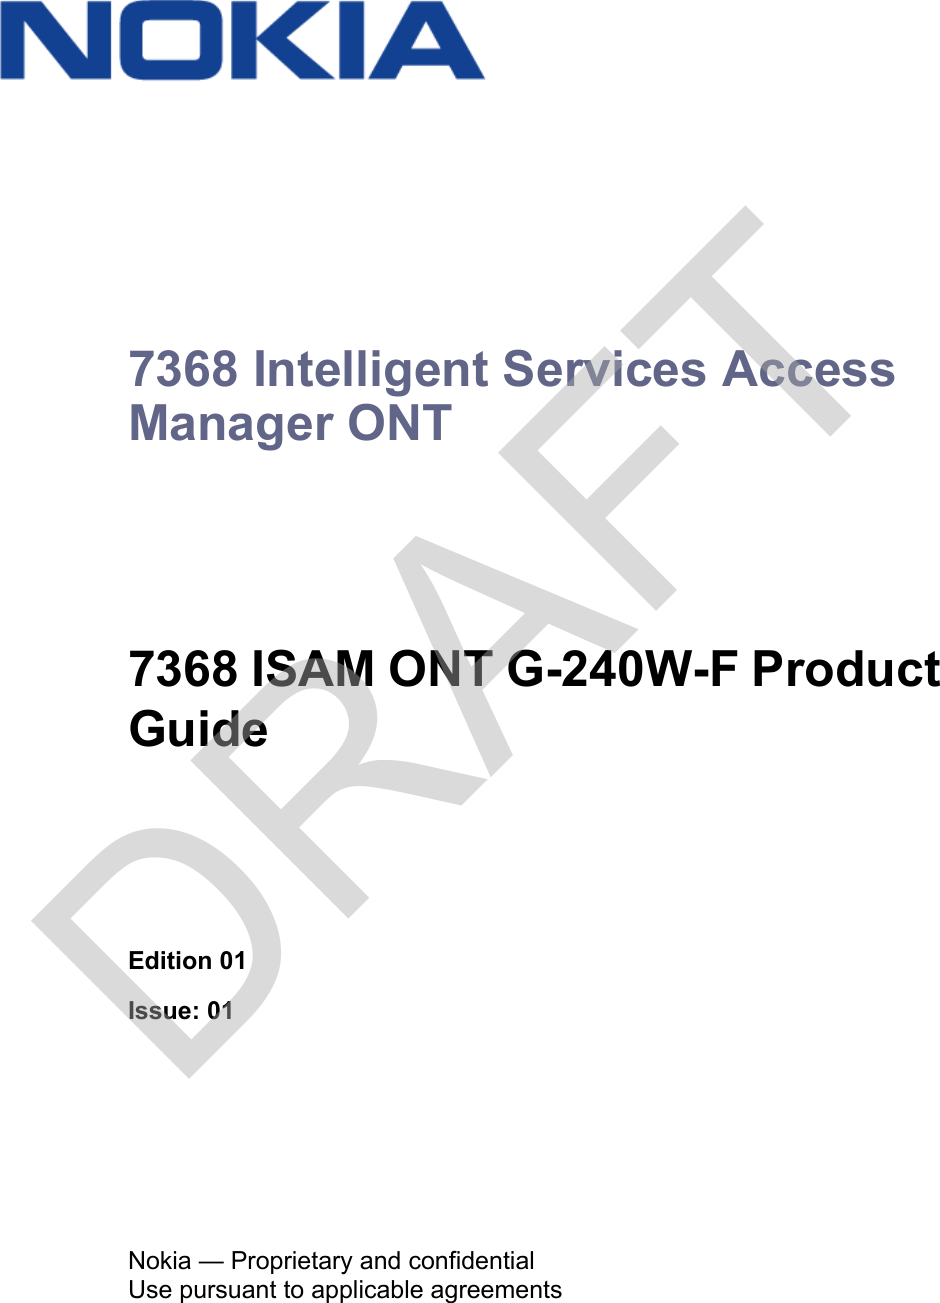 Nokia — Proprietary and confidentialUse pursuant to applicable agreements 7368 Intelligent Services Access Manager ONT7368 ISAM ONT G-240W-F Product GuideEdition 01Issue: 01 7368 ISAM ONT G-240W-F Product GuideDRAFT